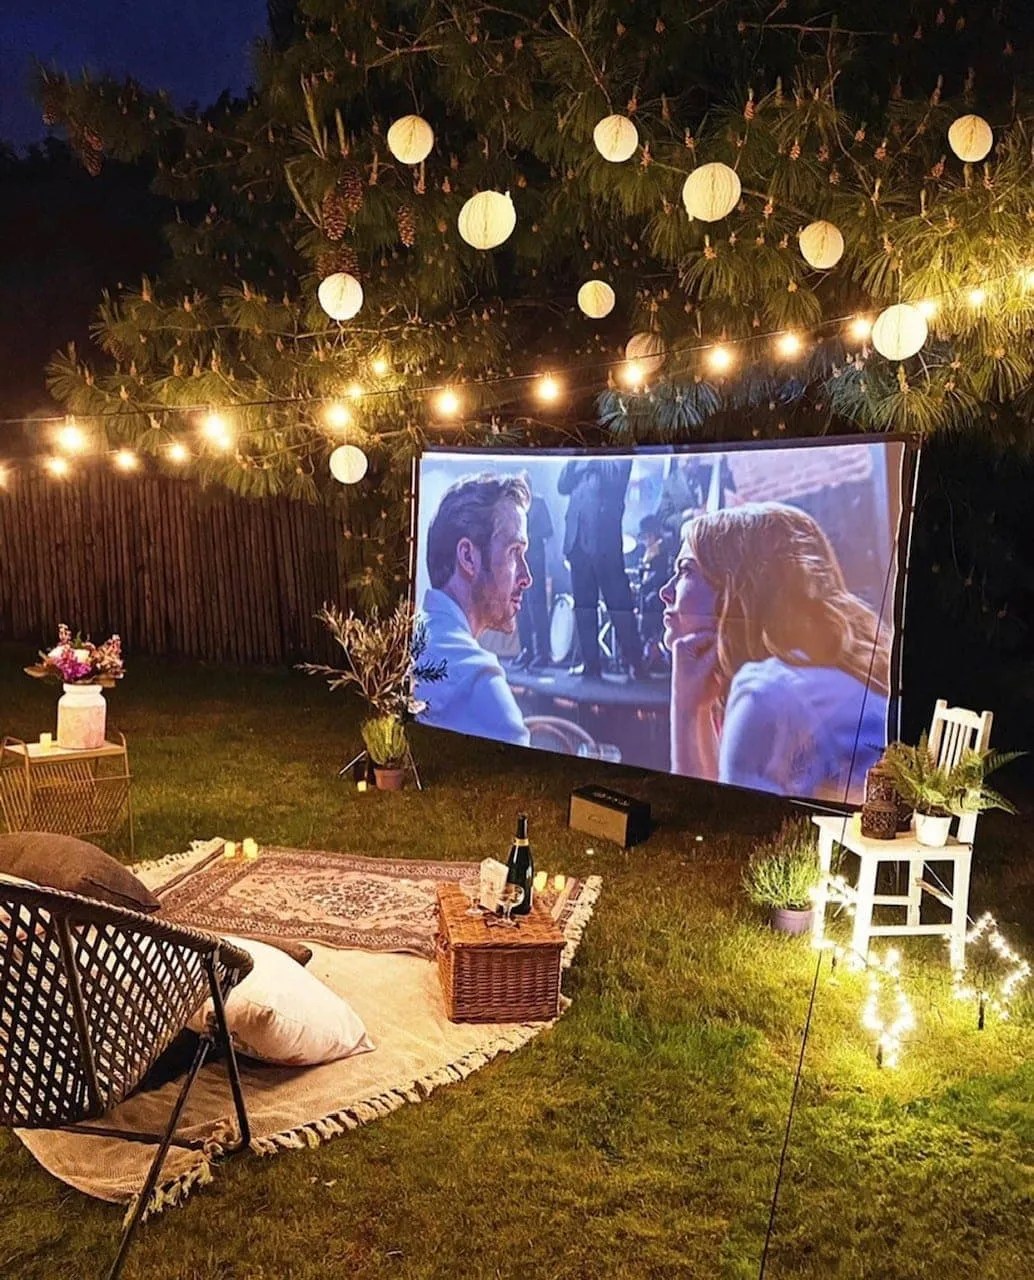 outdoor movie night with lanterns and string lights in the garden